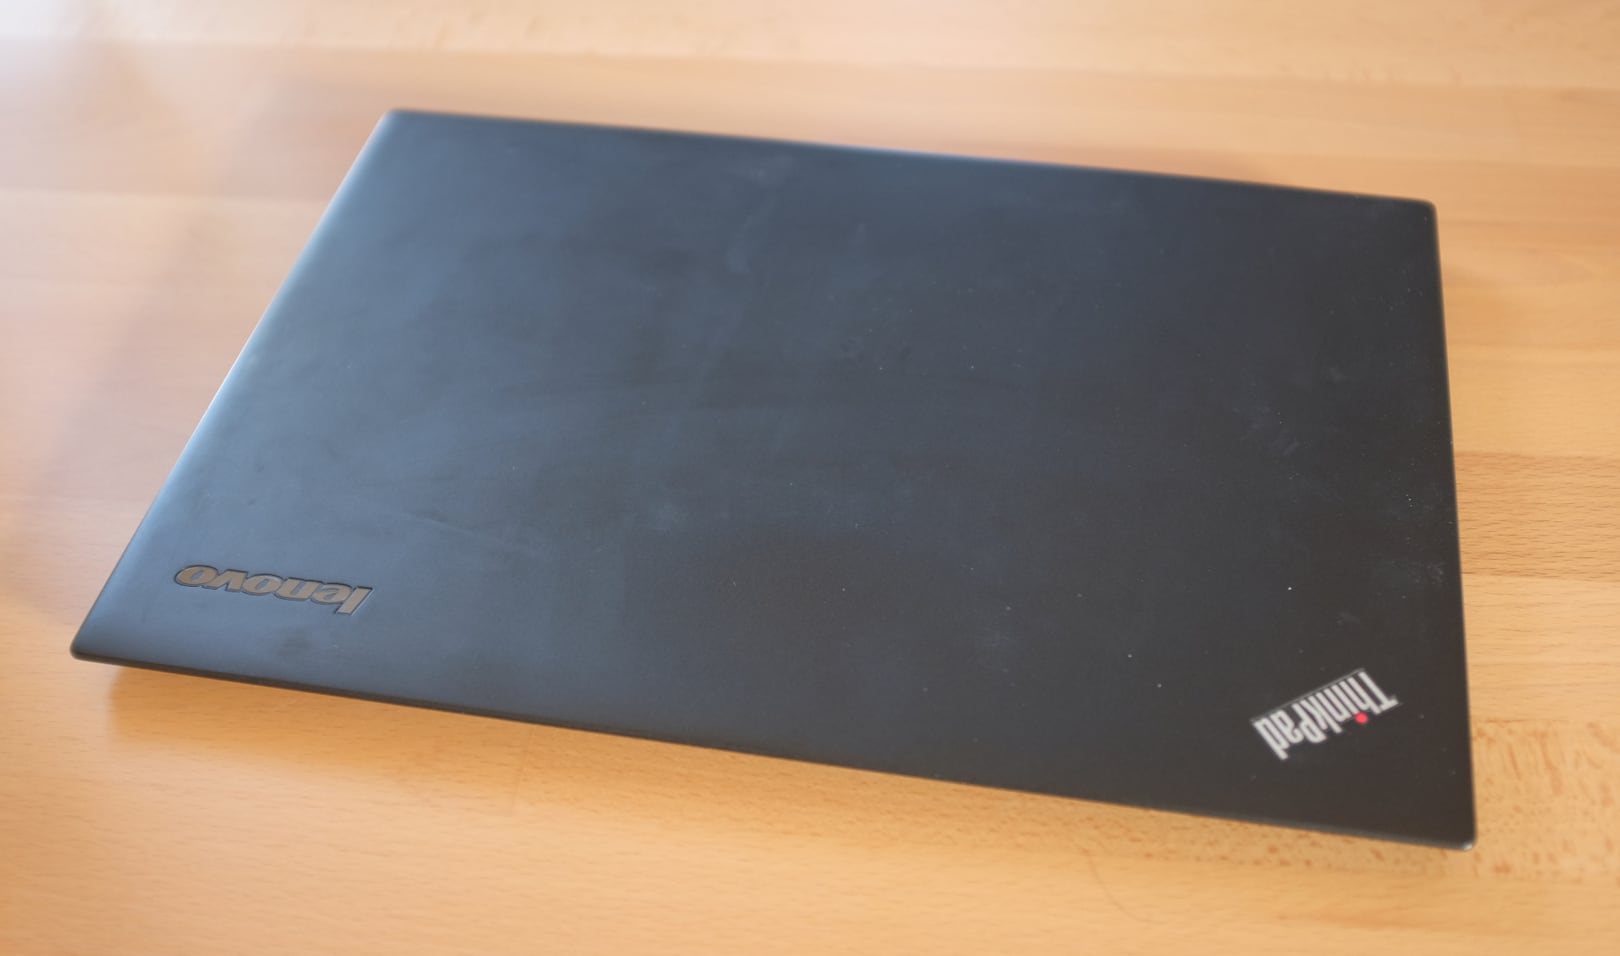 ThinkPad X1 Carbon : 5 years later